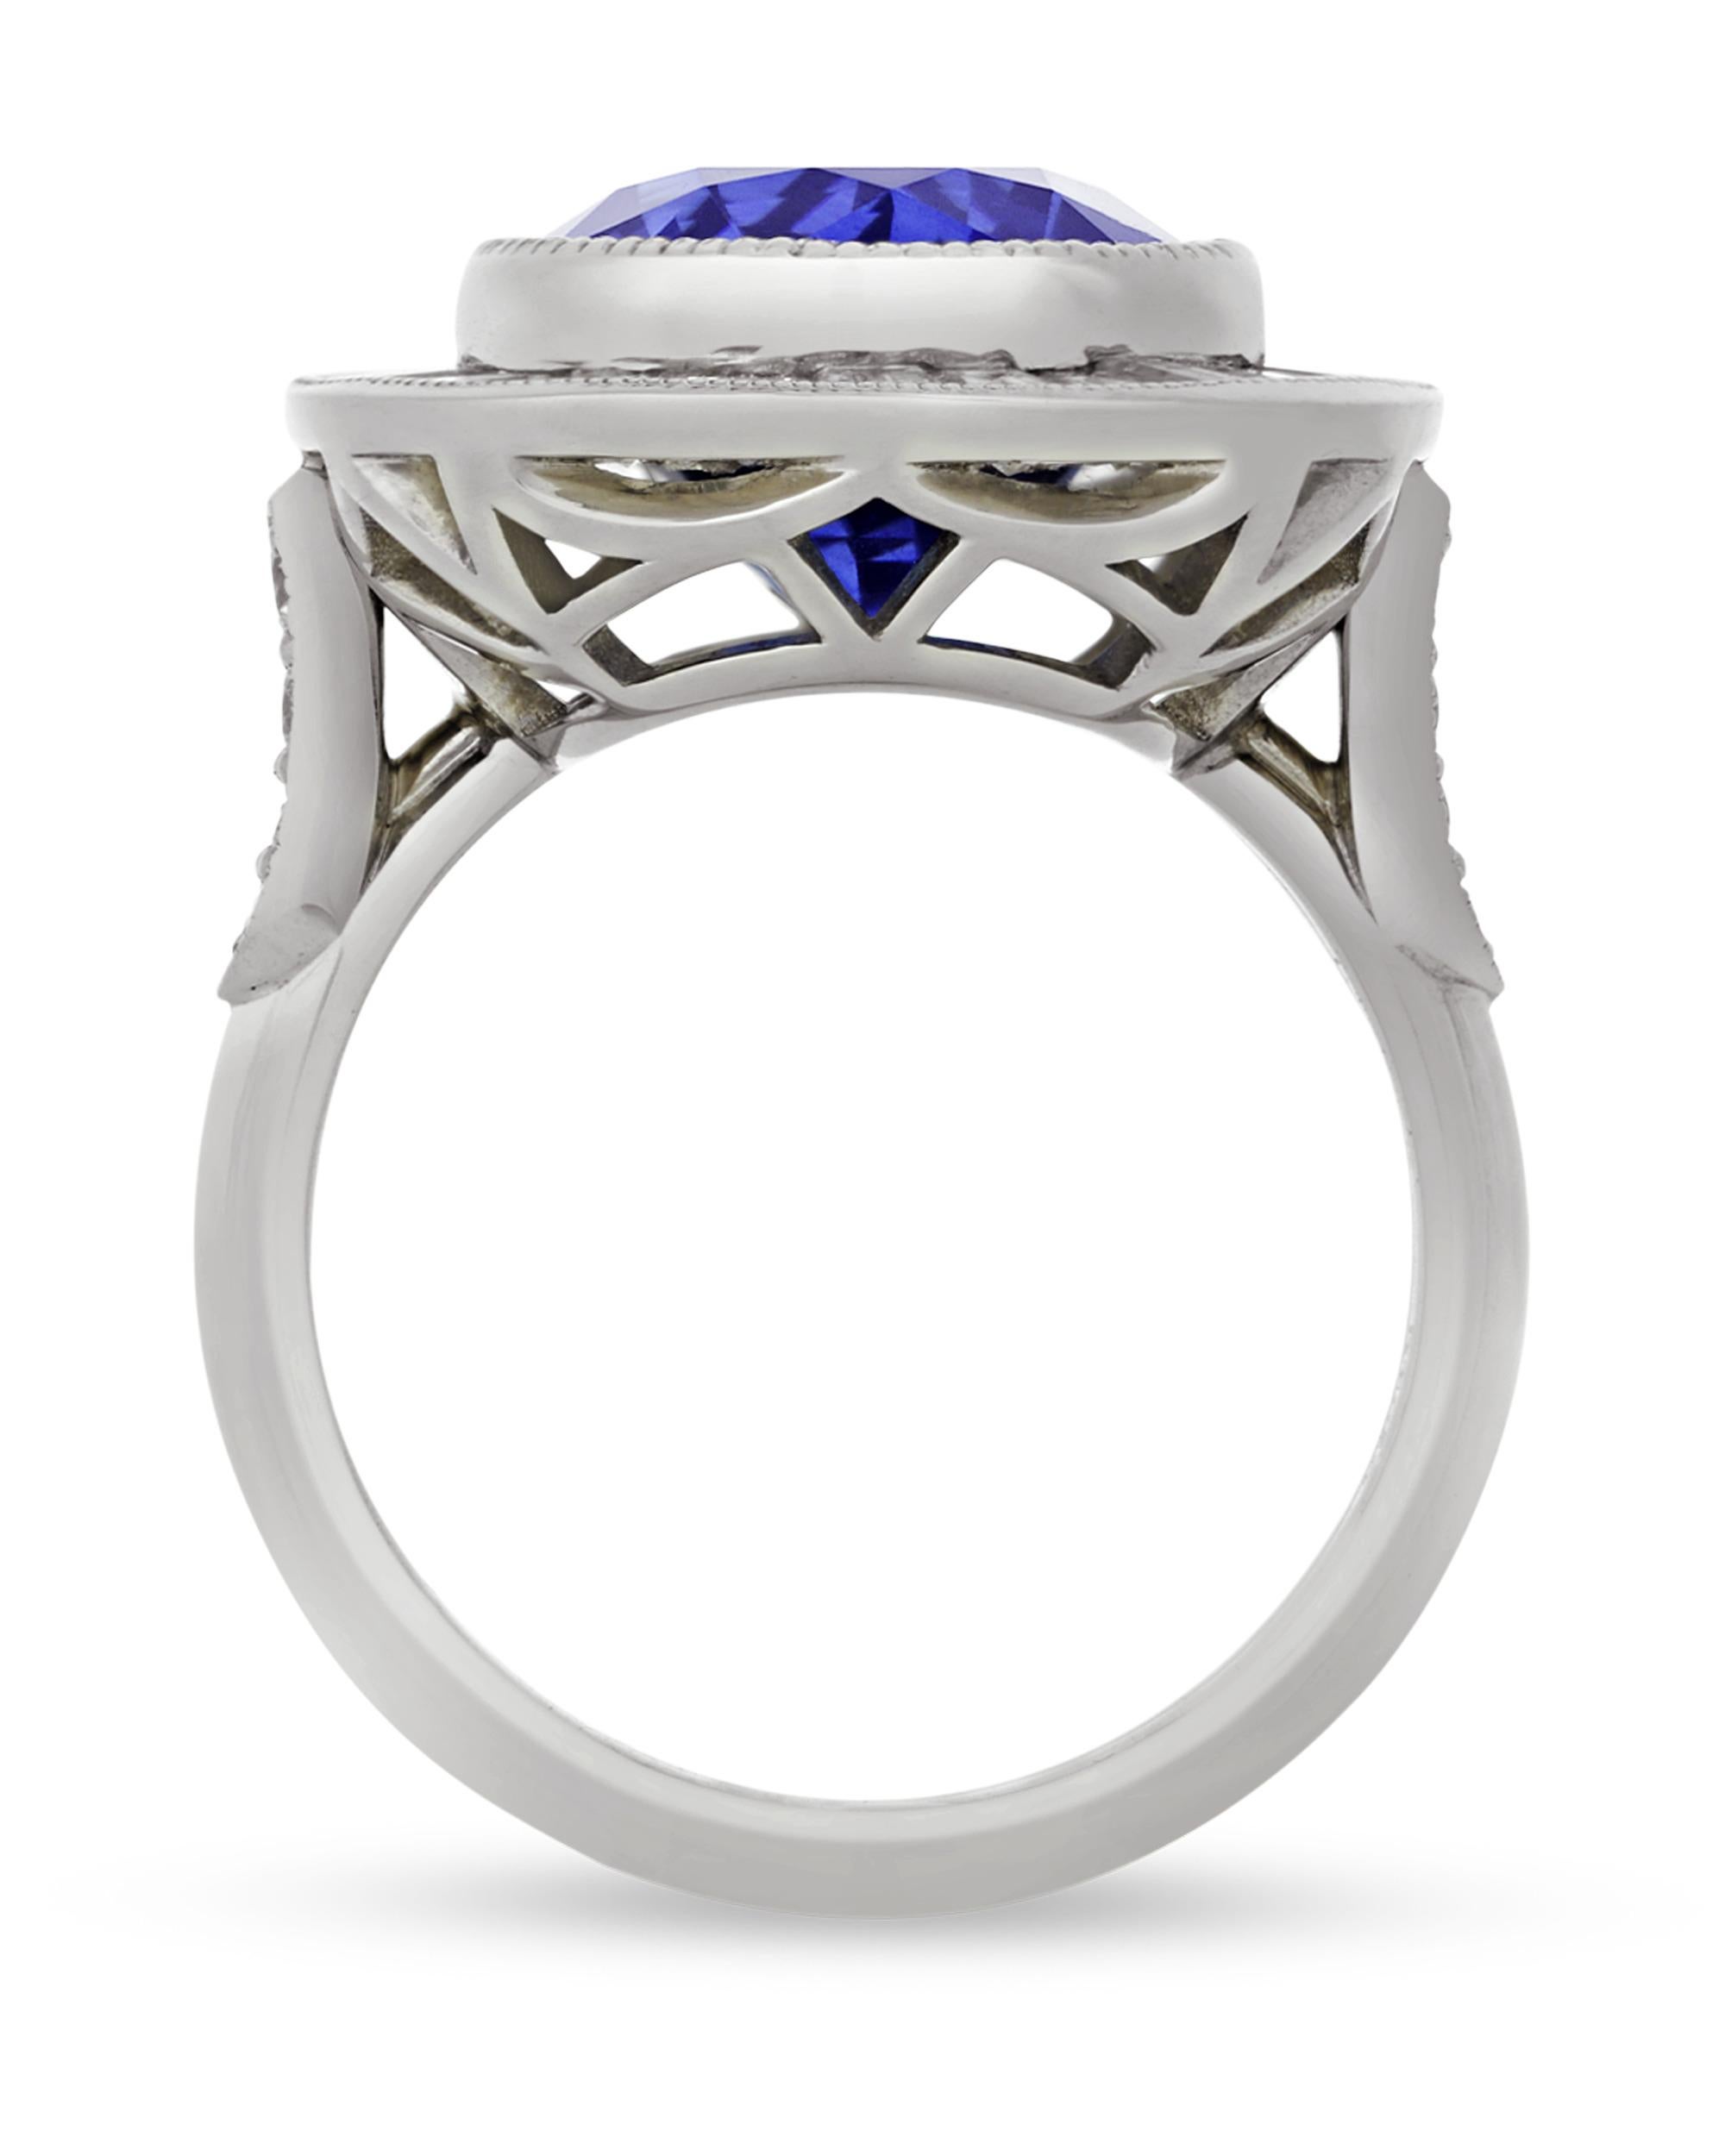 A brilliant-cut sapphire displays a deep royal blue hue in this elegant ring. The 7.10-carat sapphire at the heart of this classic ring is certified by the Gemological Institute of America (GIA) as being Ceylon in origin. Displaying the rich blue